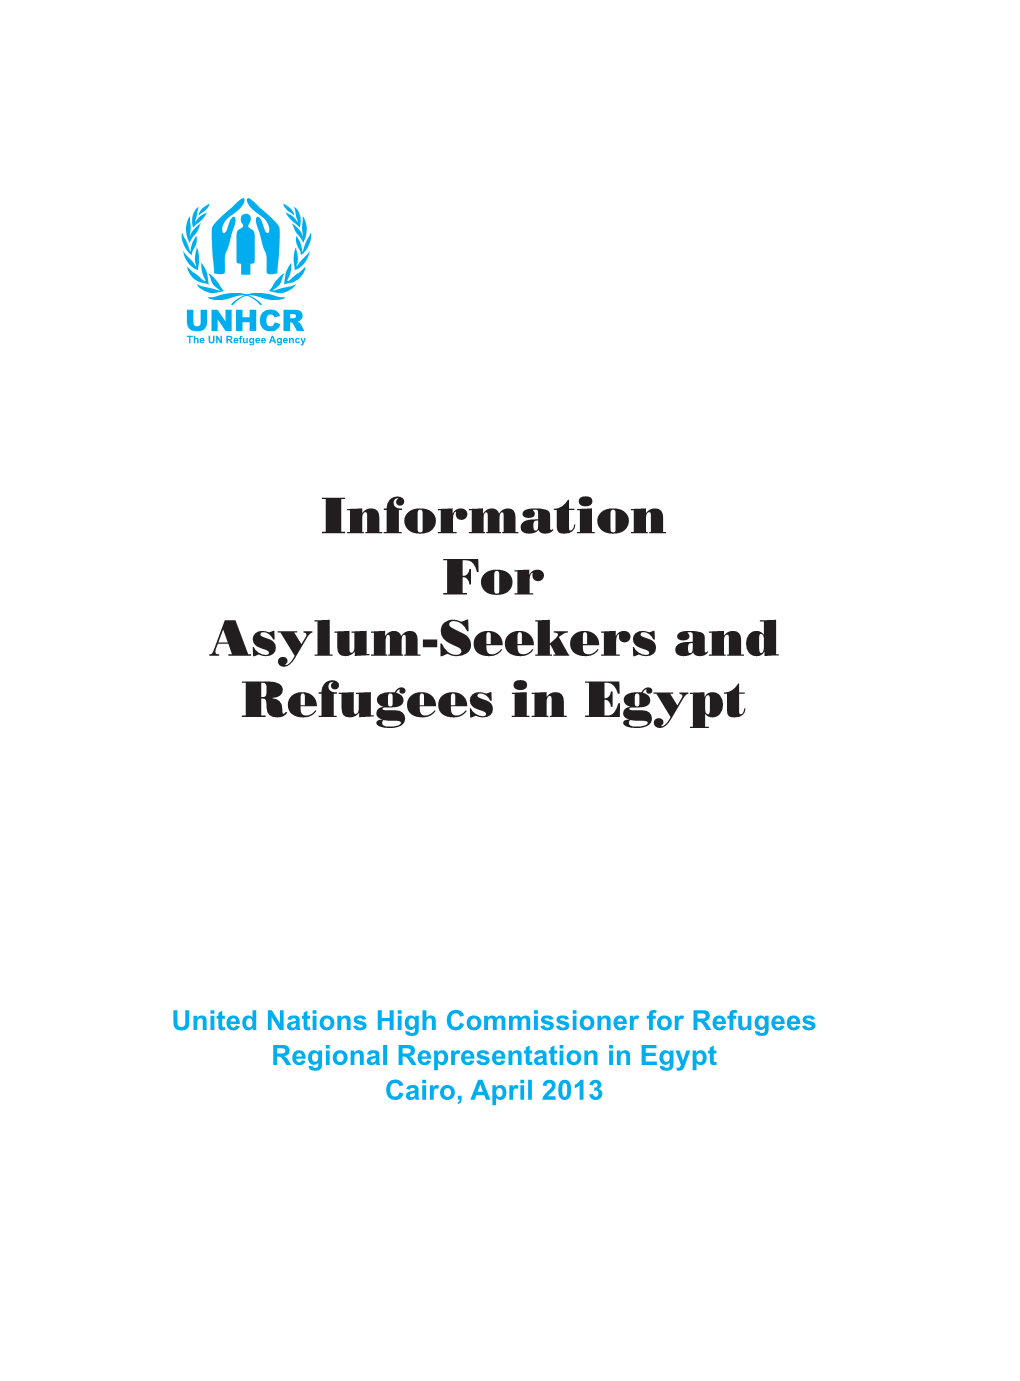 Information for Asylum-Seekers and Refugees in Egypt